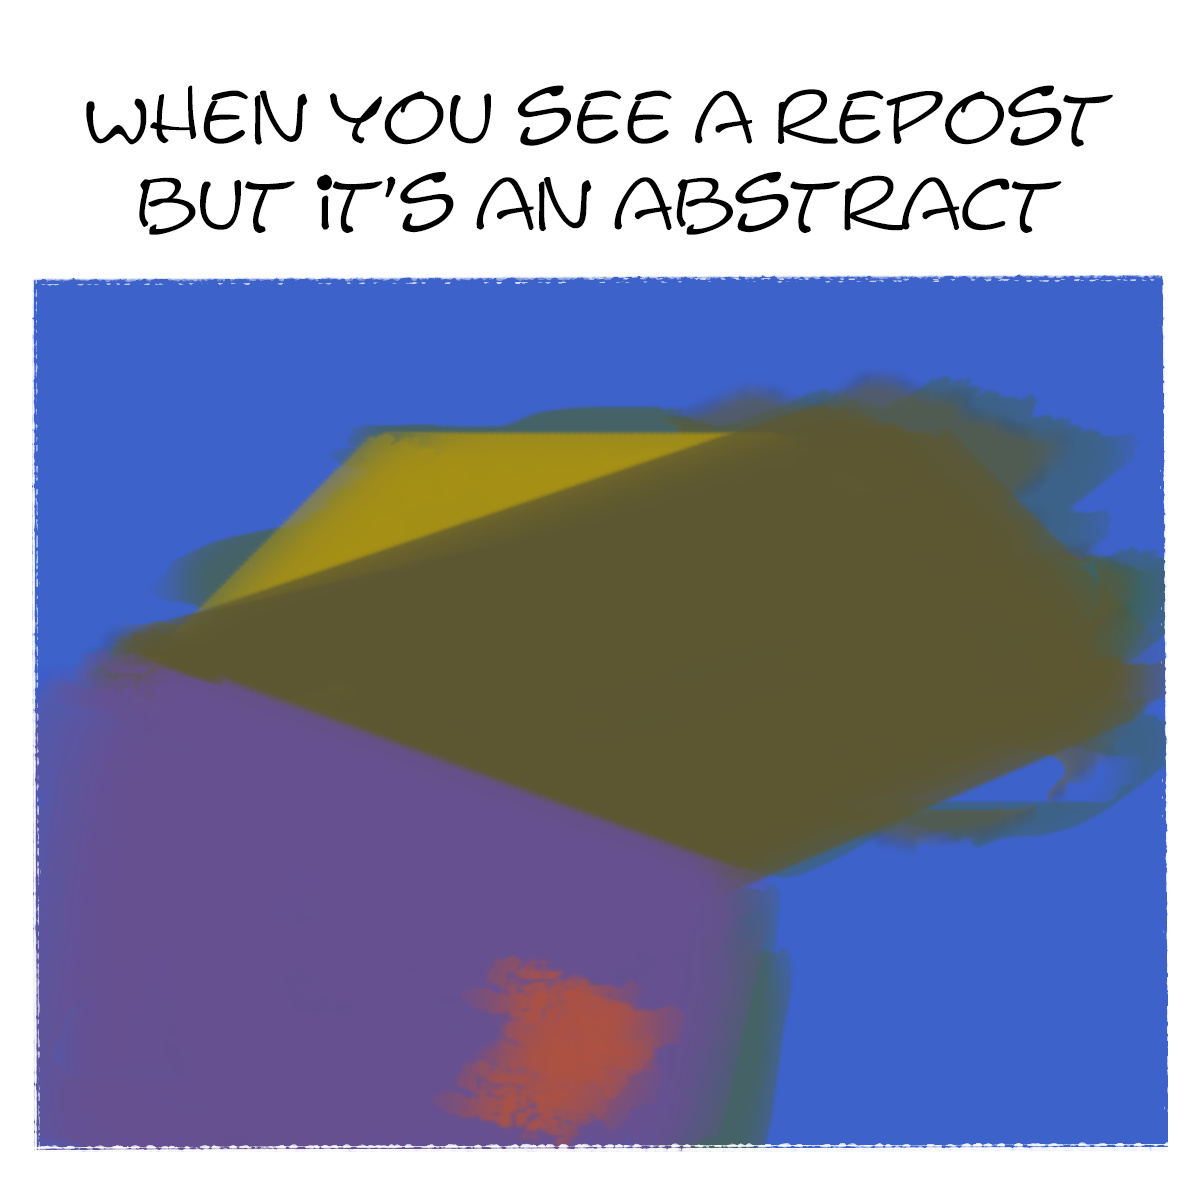 When you see a repost but it's an abstract - meme